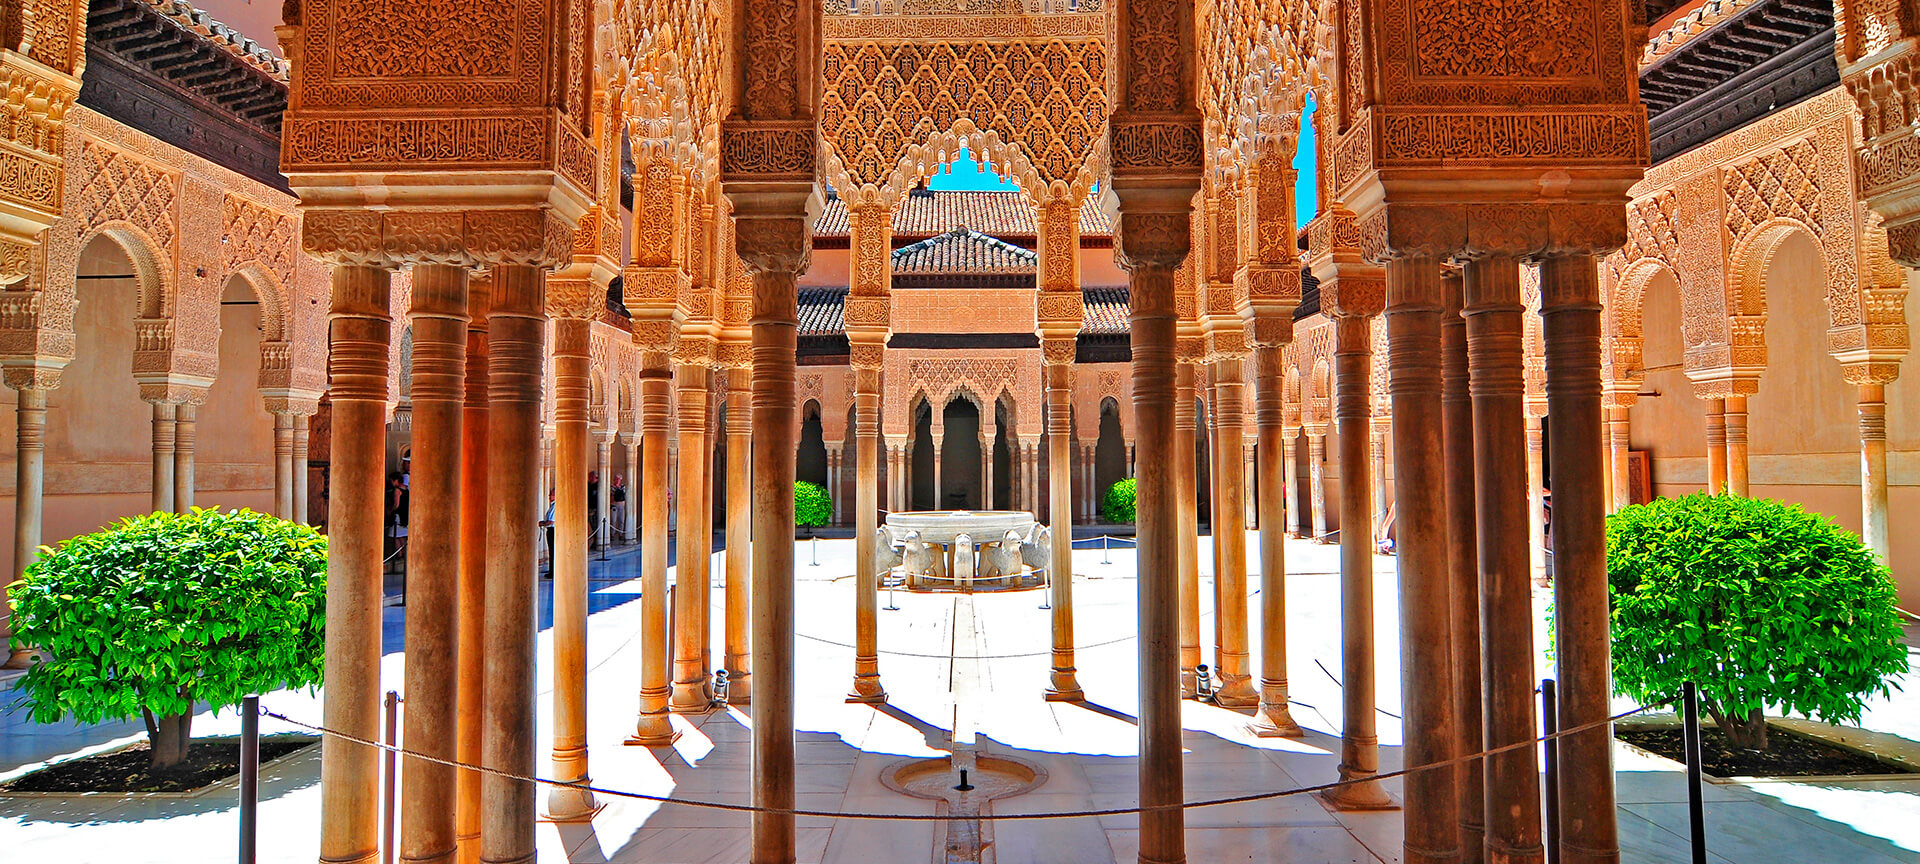 Recommendations for visiting the Alhambra in Granada | spain.info